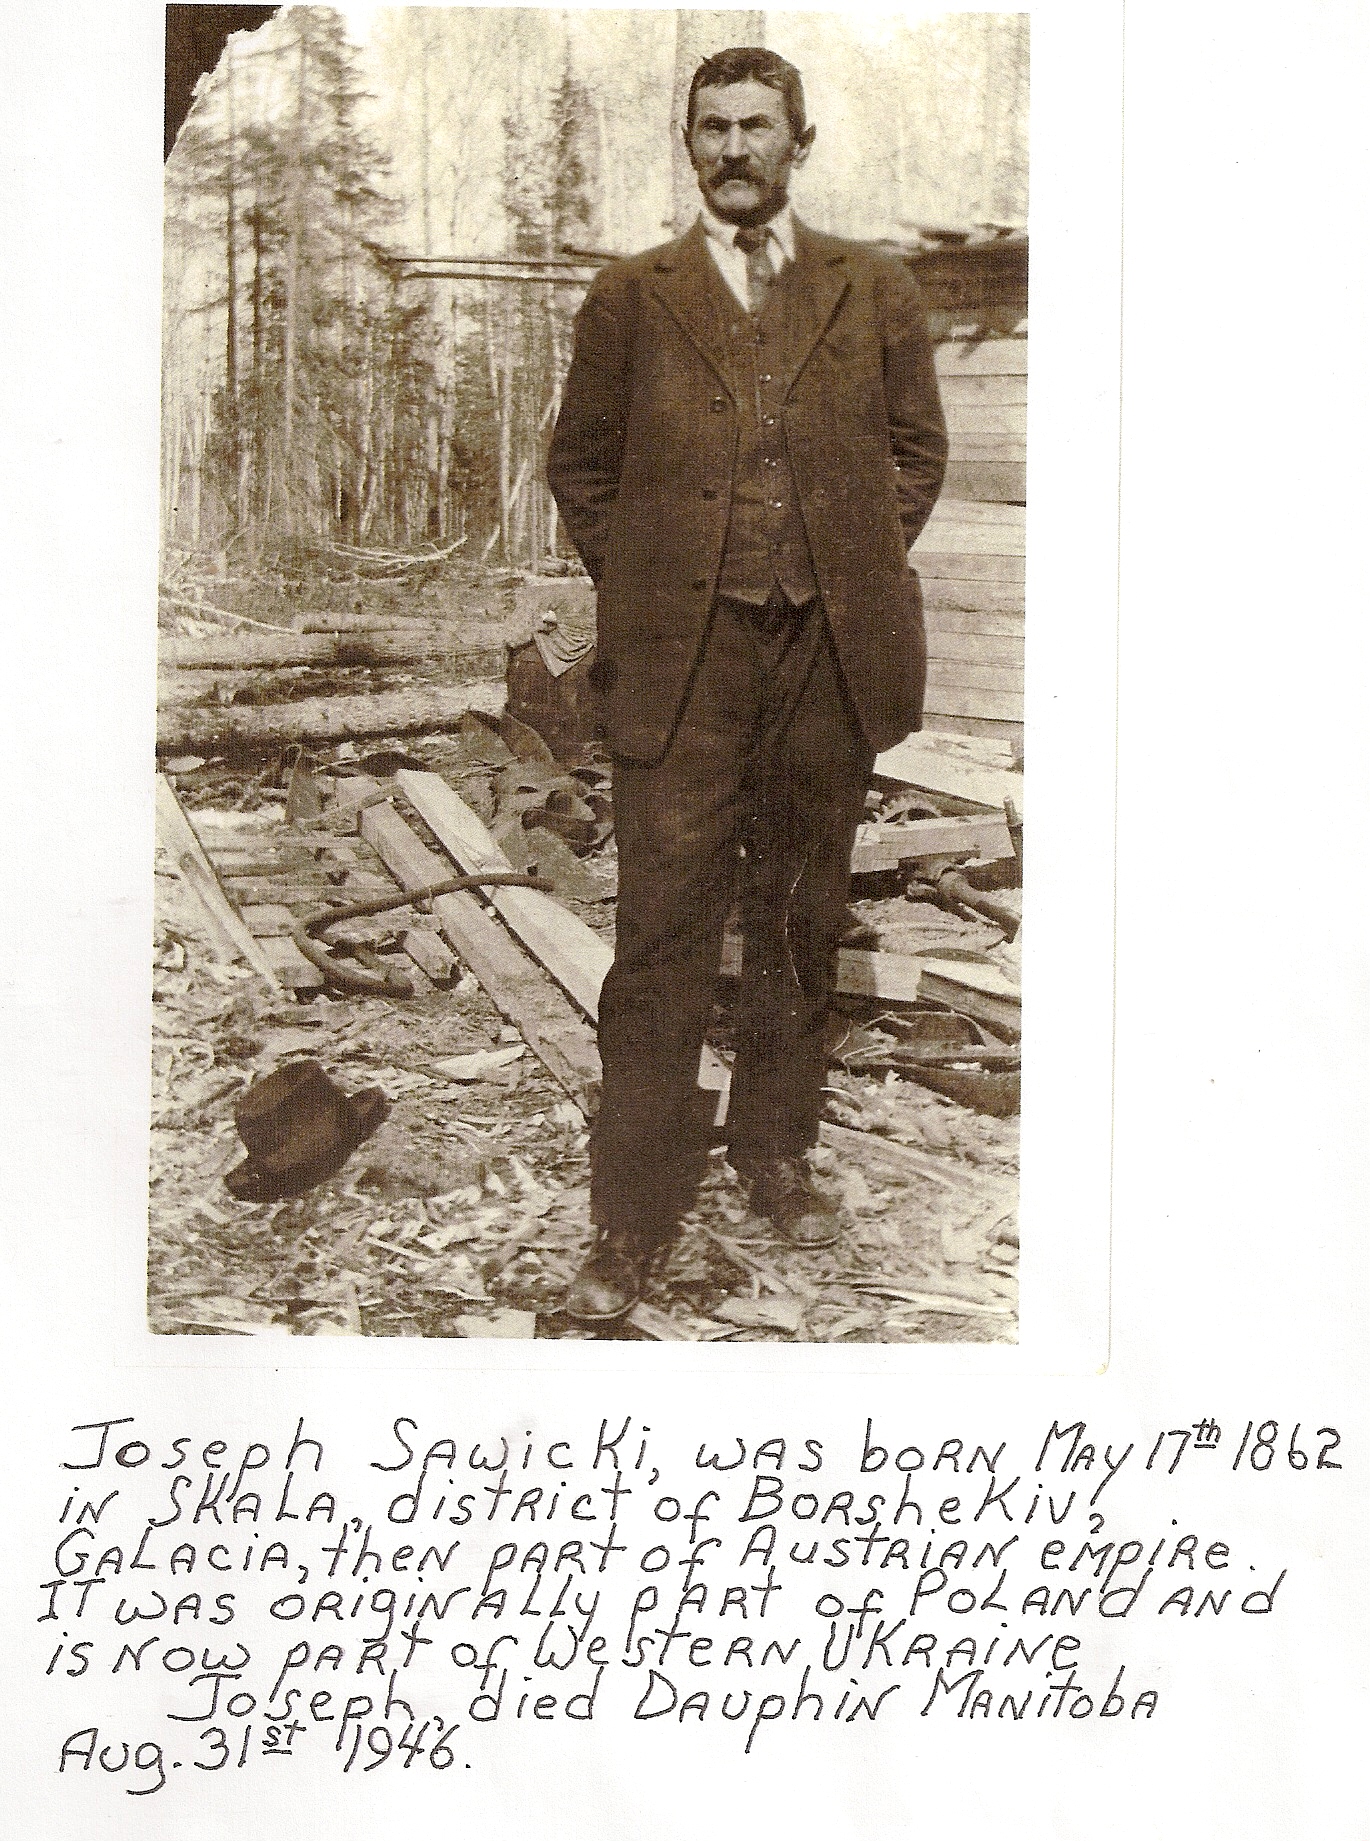 Joseph standing by construction - with info